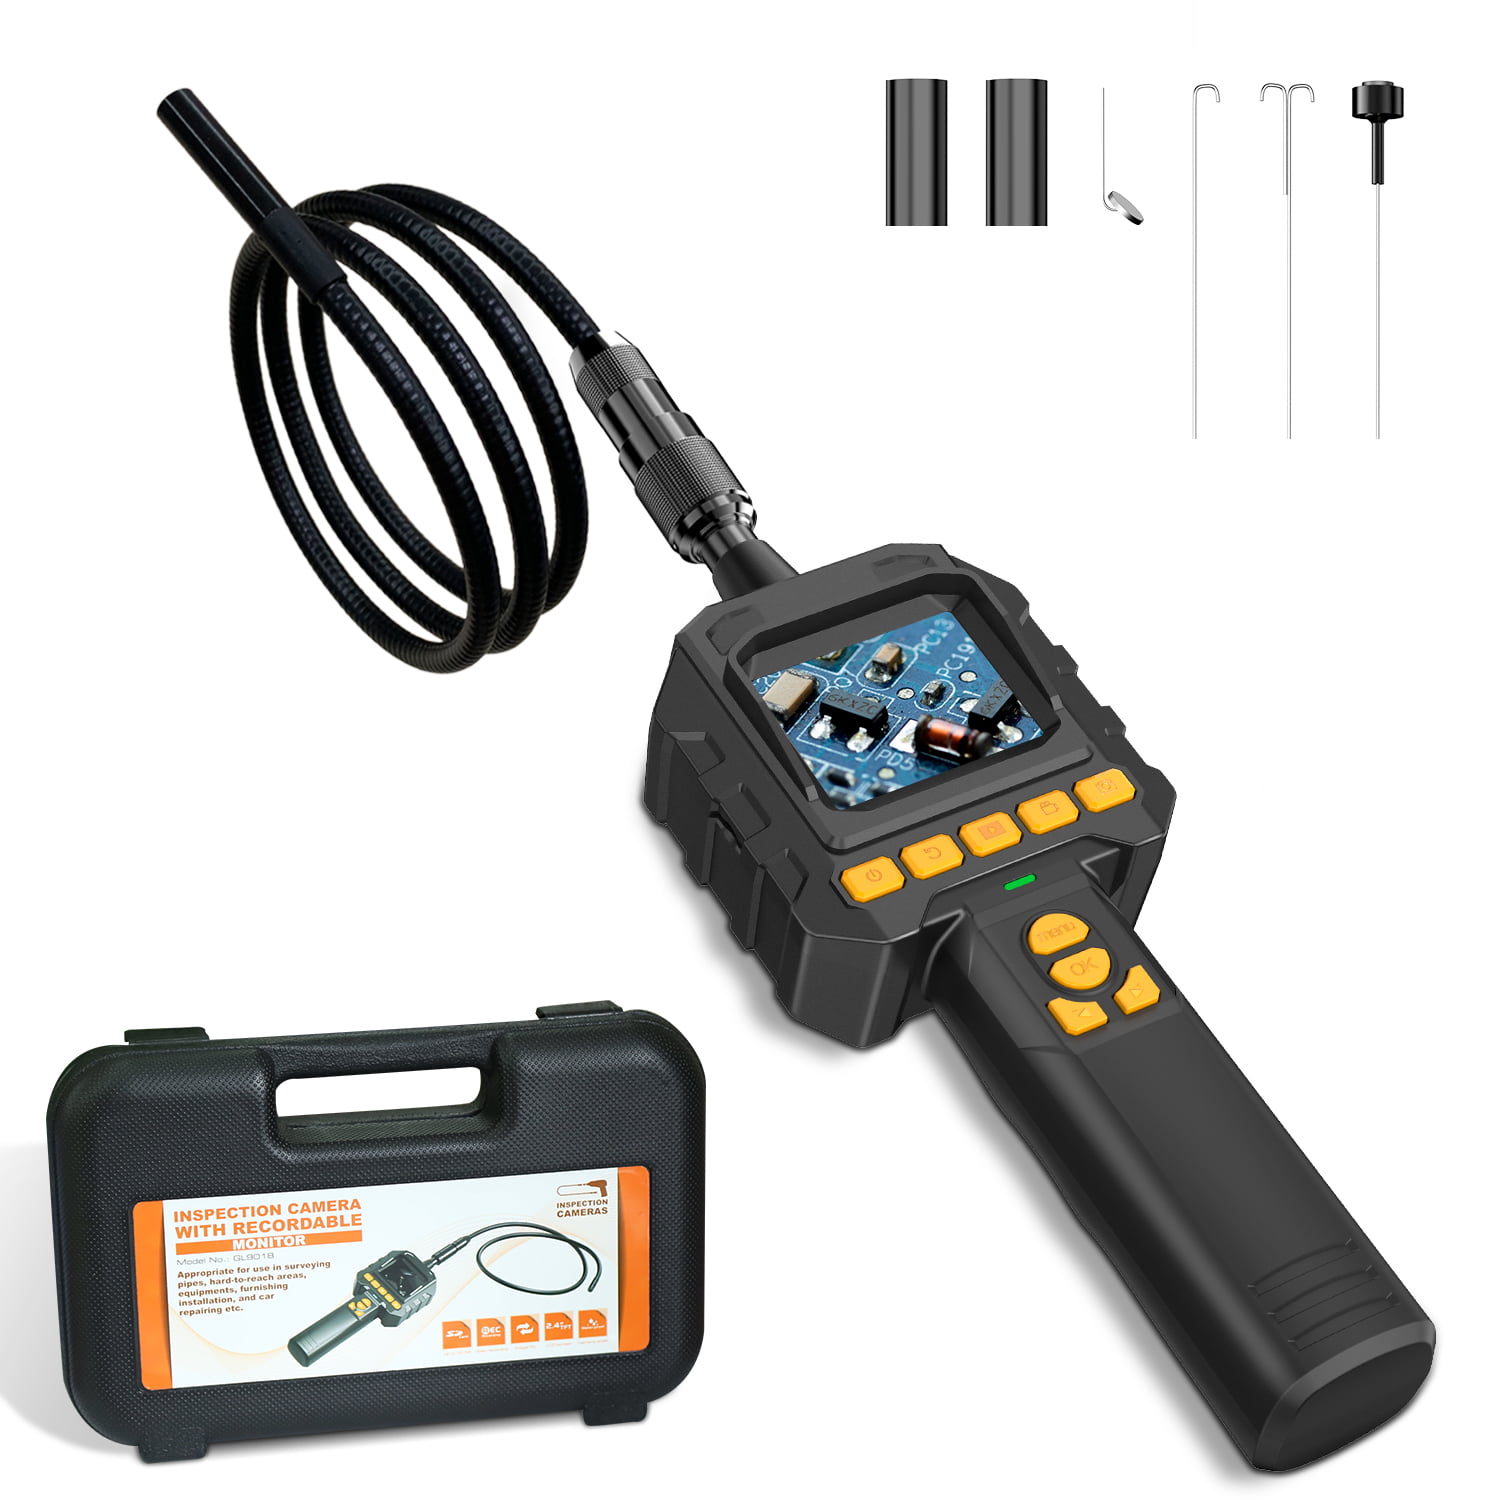 DEPSTECH 16 FT Waterproof LCD Borescope Videoscope with CMOS Sensor Inspection Camera 5M Digital Endoscope 3.5inch Color LCD Screen,4 Zoom Options -16.4FT 